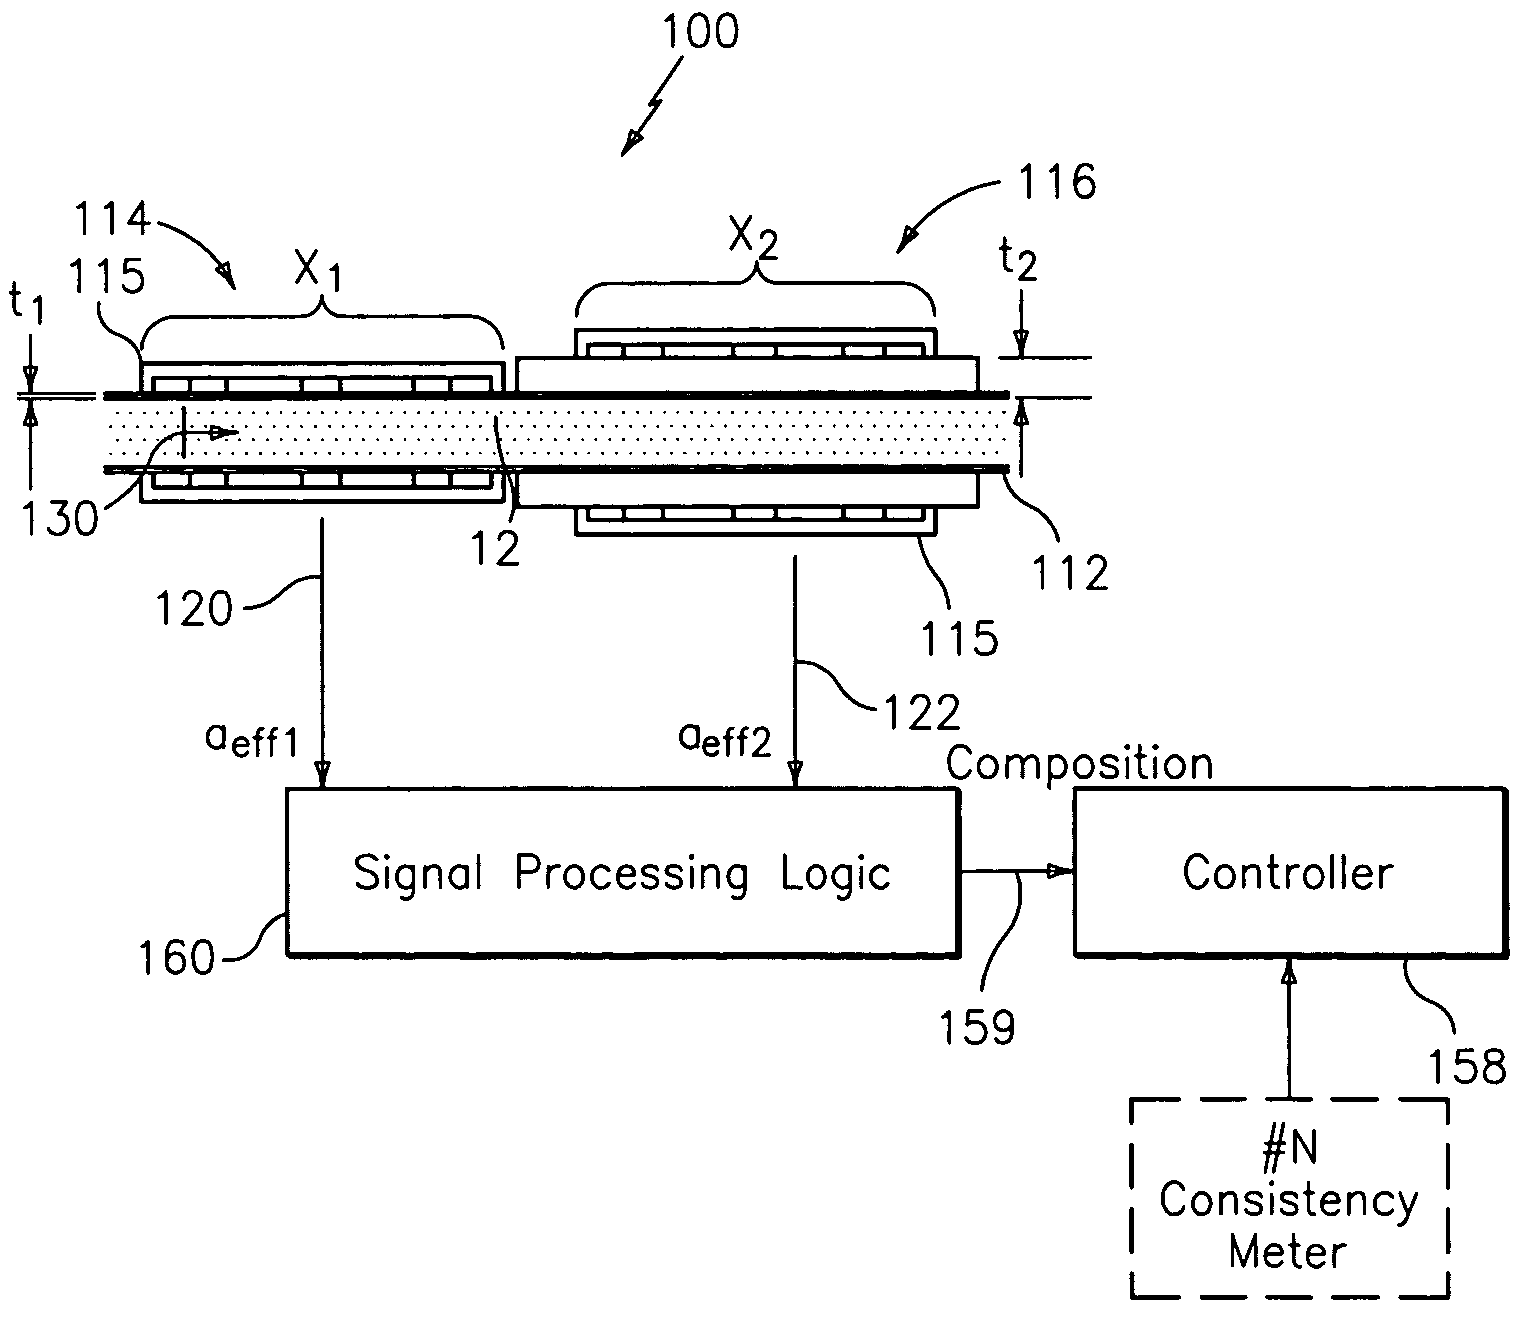 Apparatus and method for measuring multi-Phase flows in pulp and paper industry applications